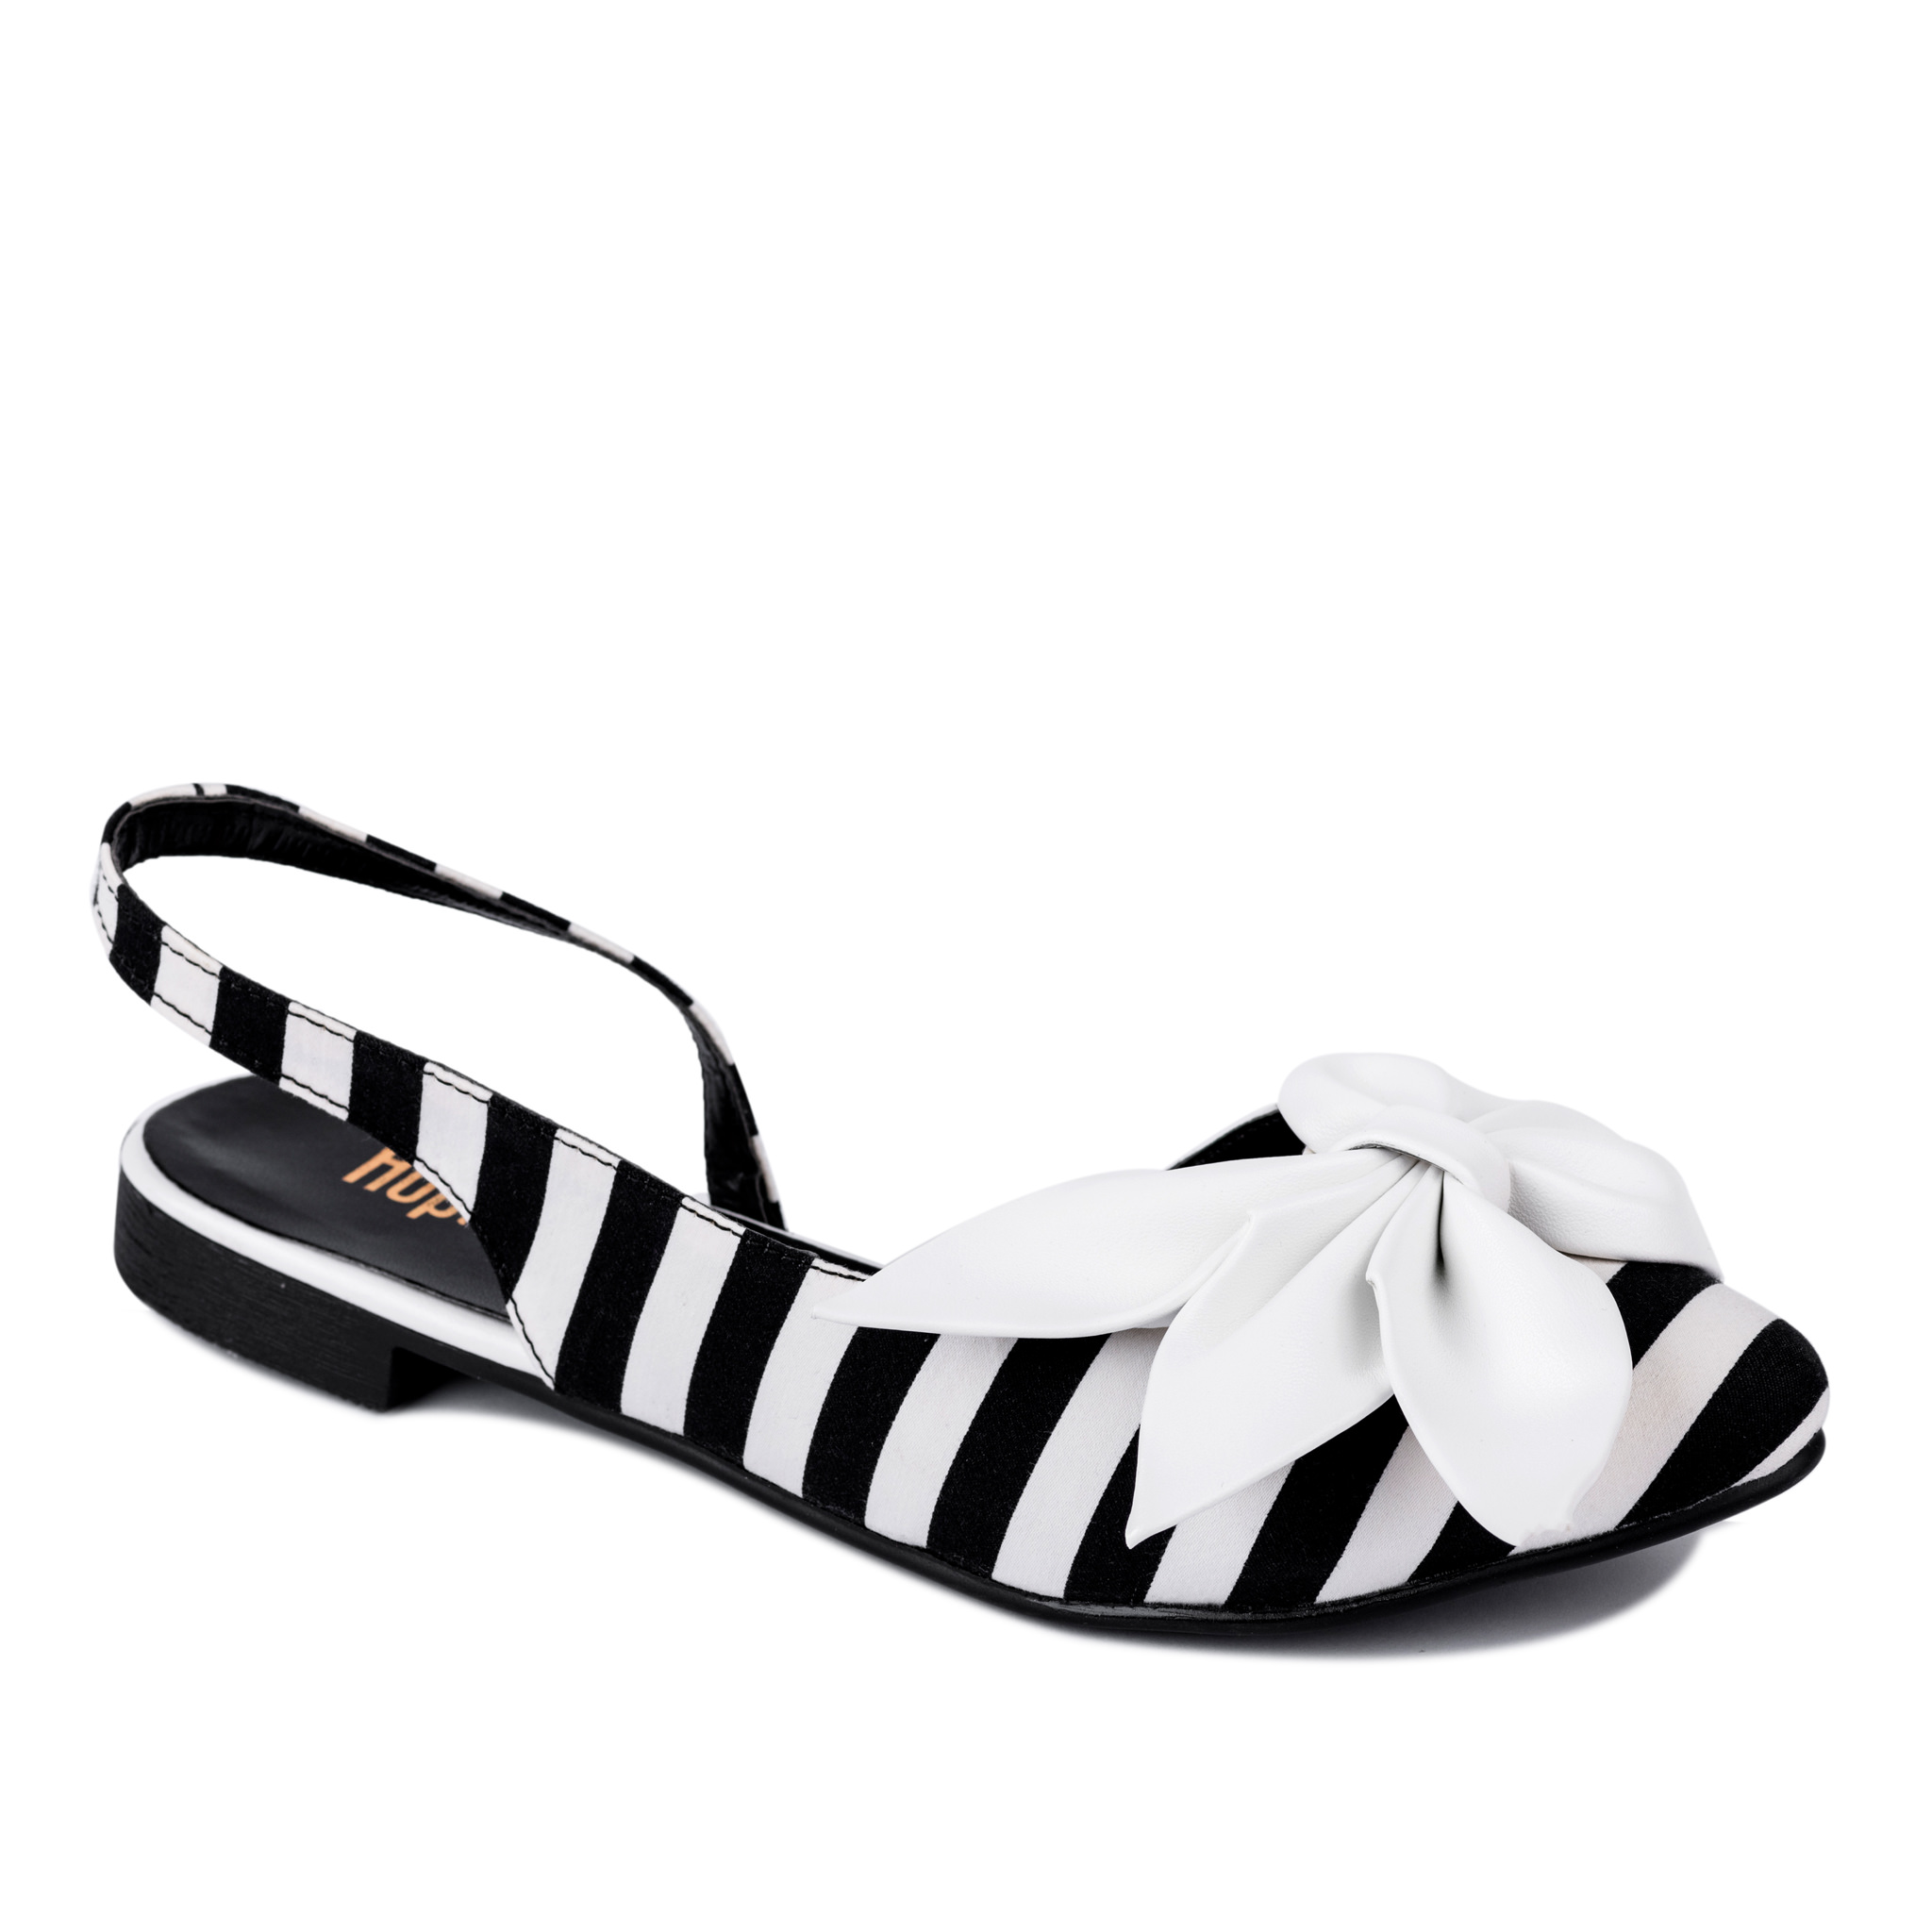 STRIPED FLATS WITH WHITE BOW - BLACK/WHITE